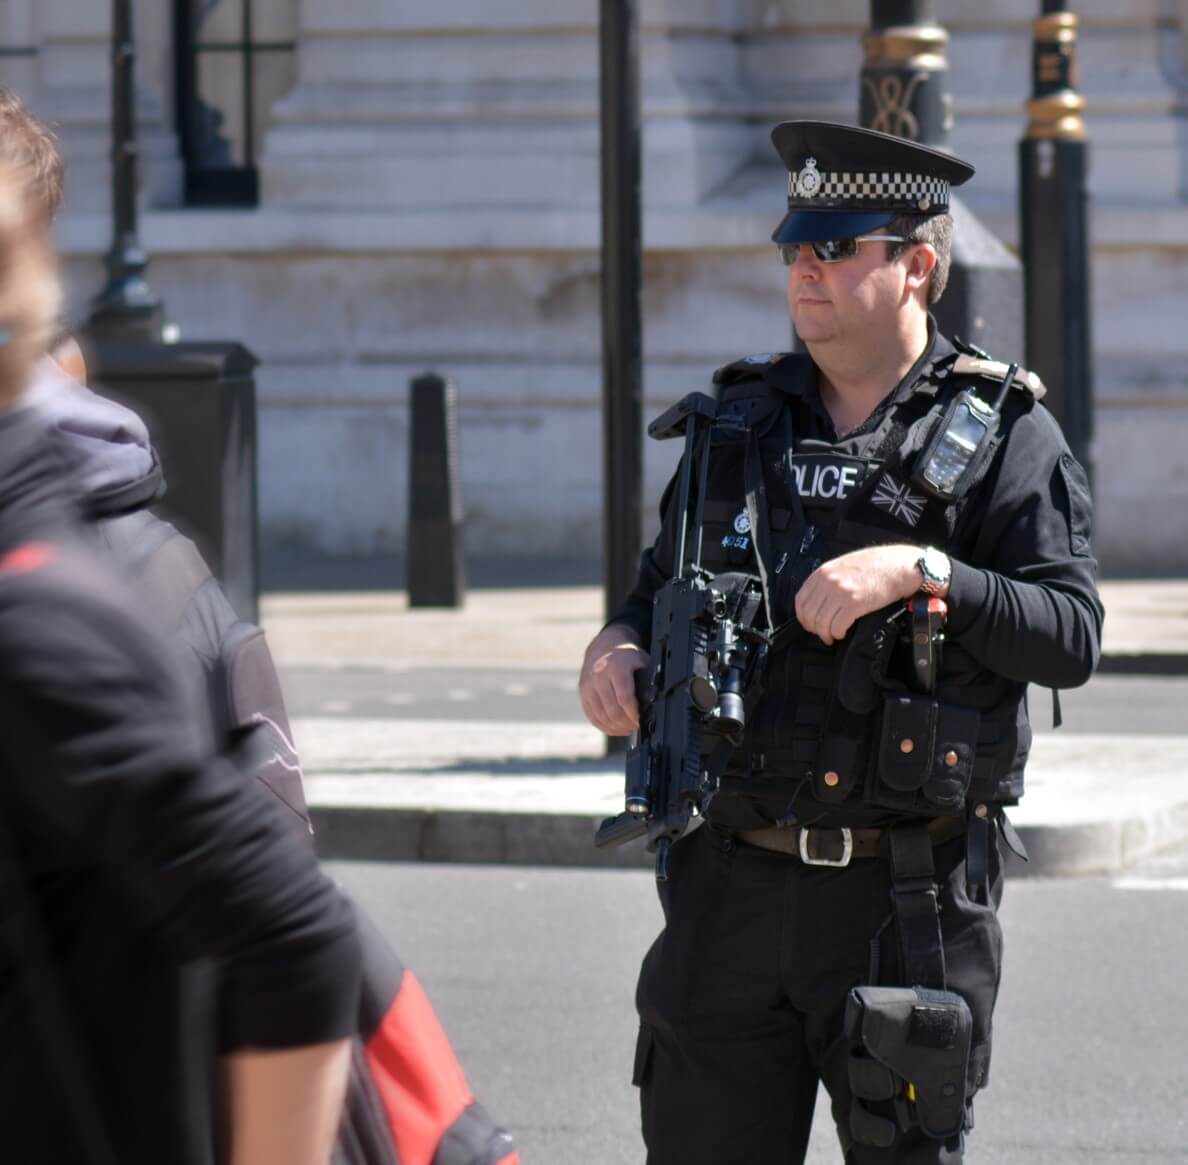 How to Become a Police Officer UK